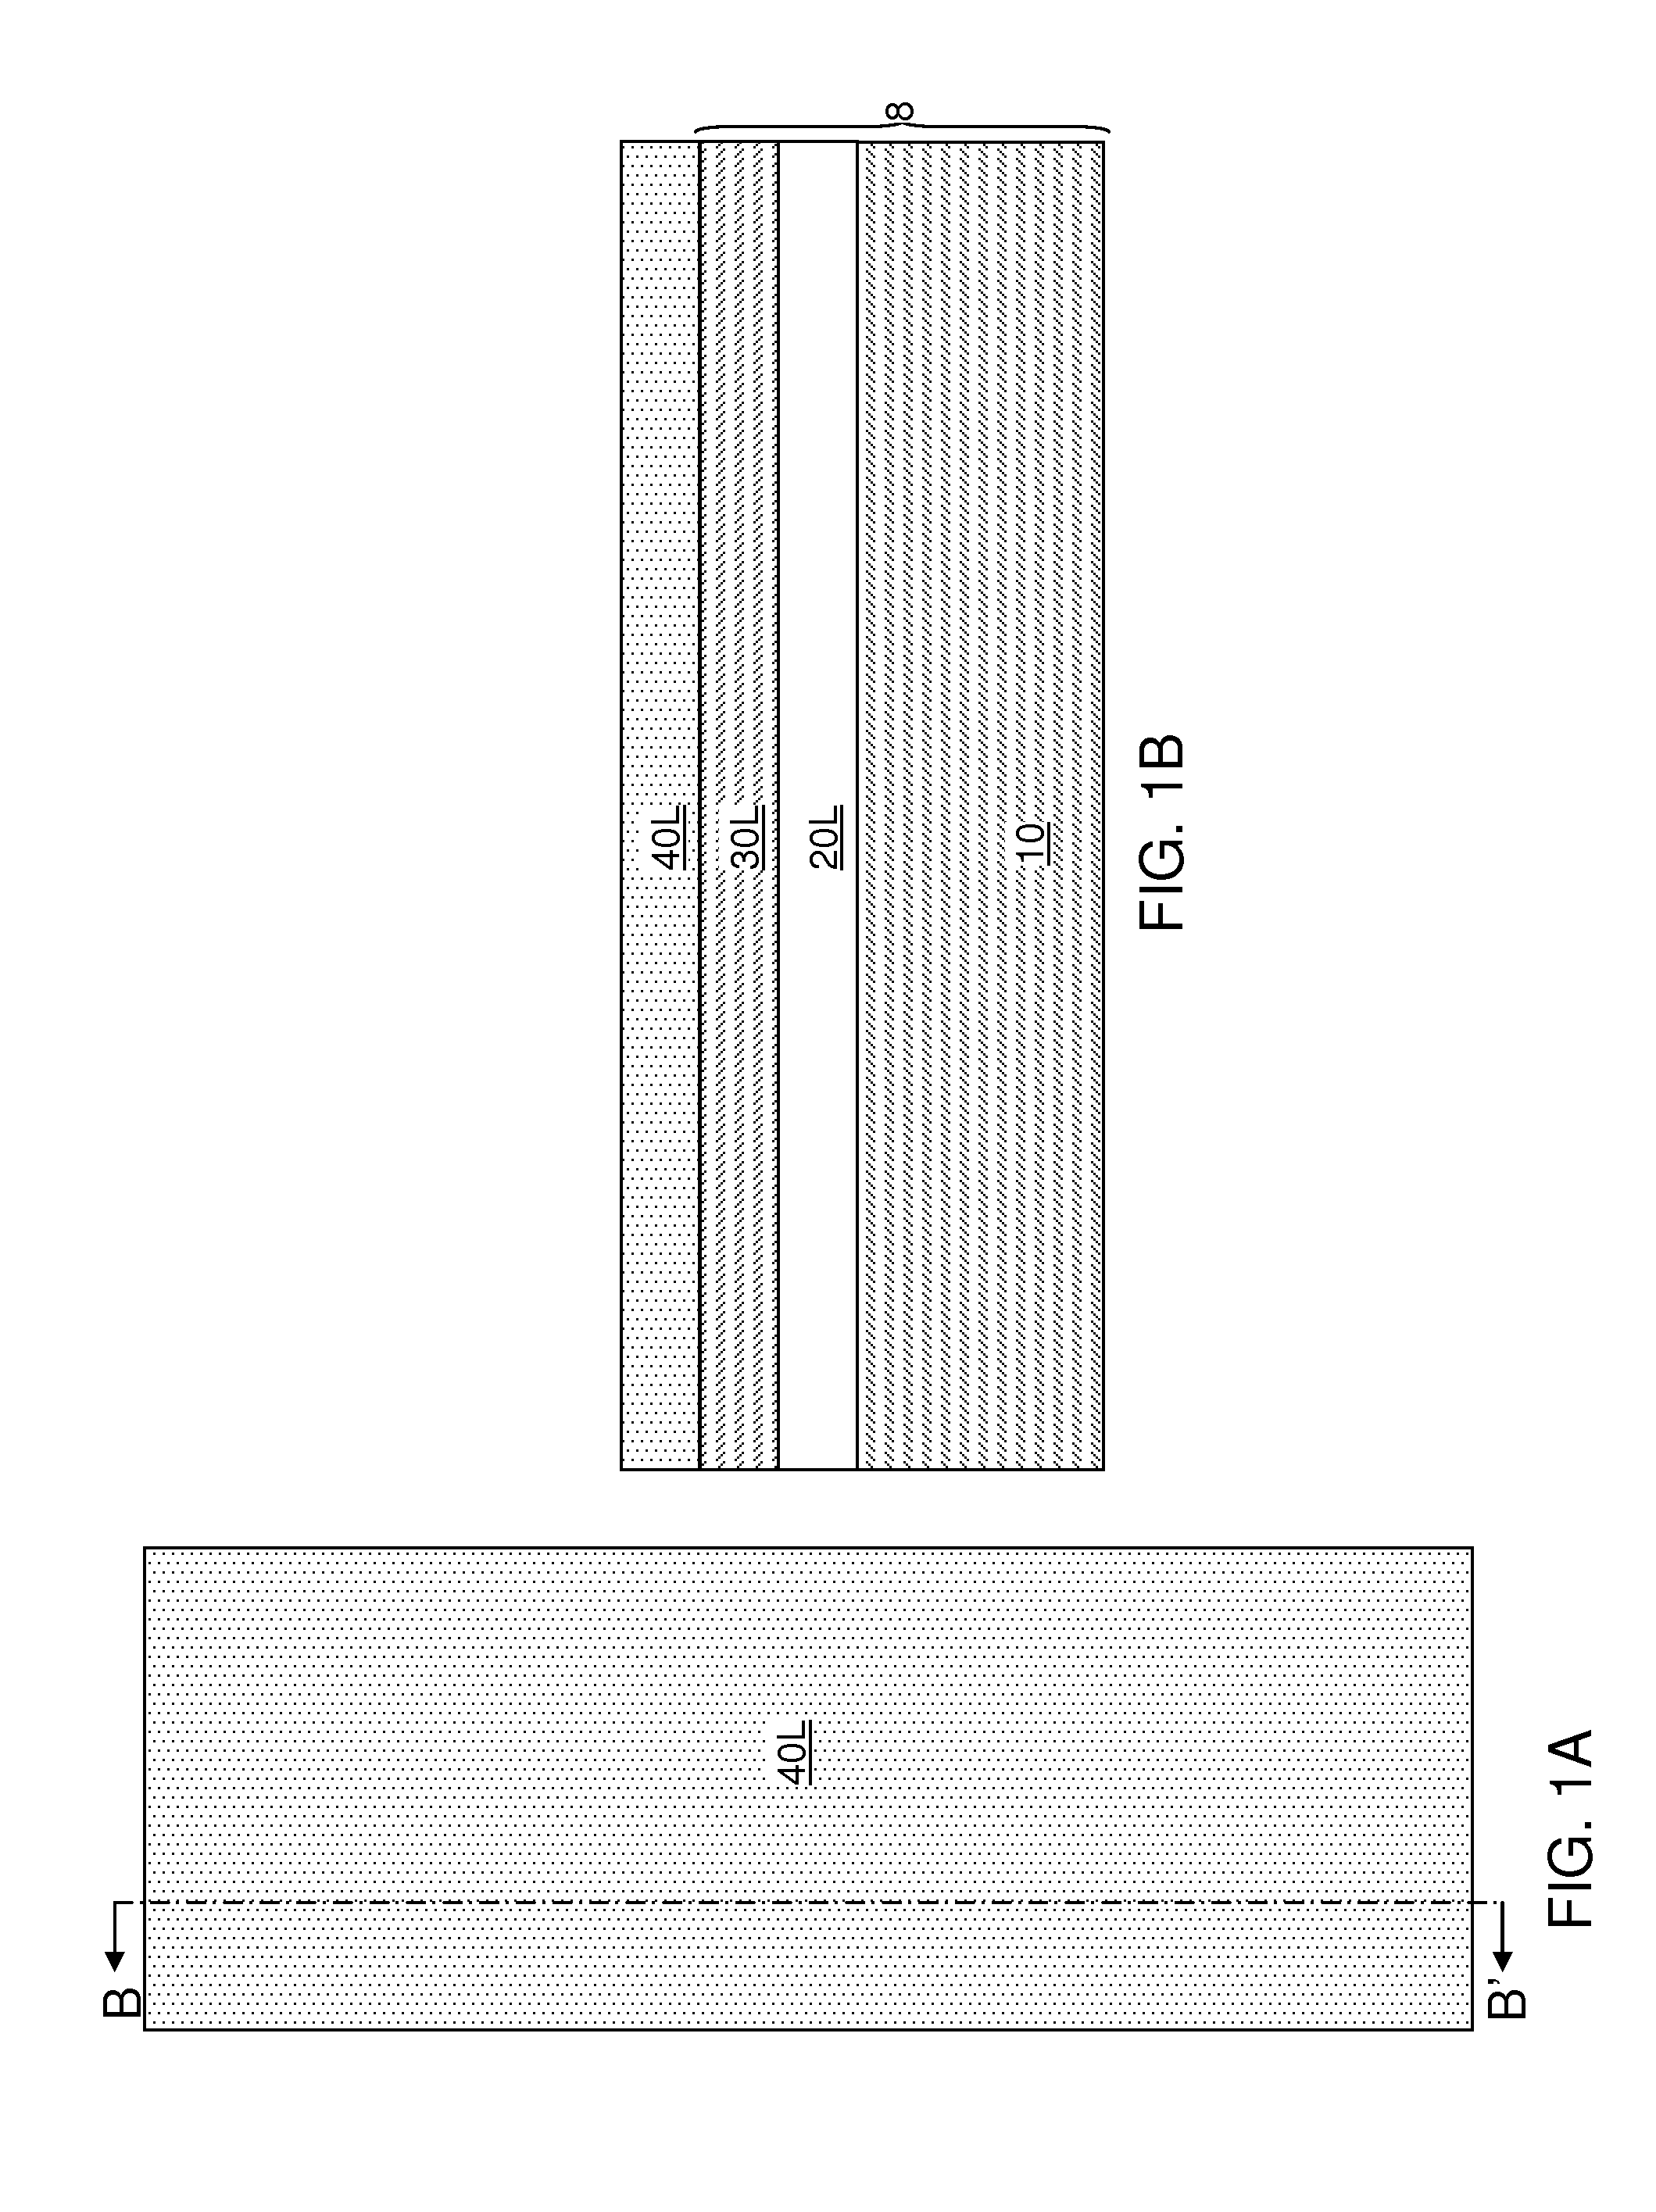 Dual-depth self-aligned isolation structure for a back gate electrode